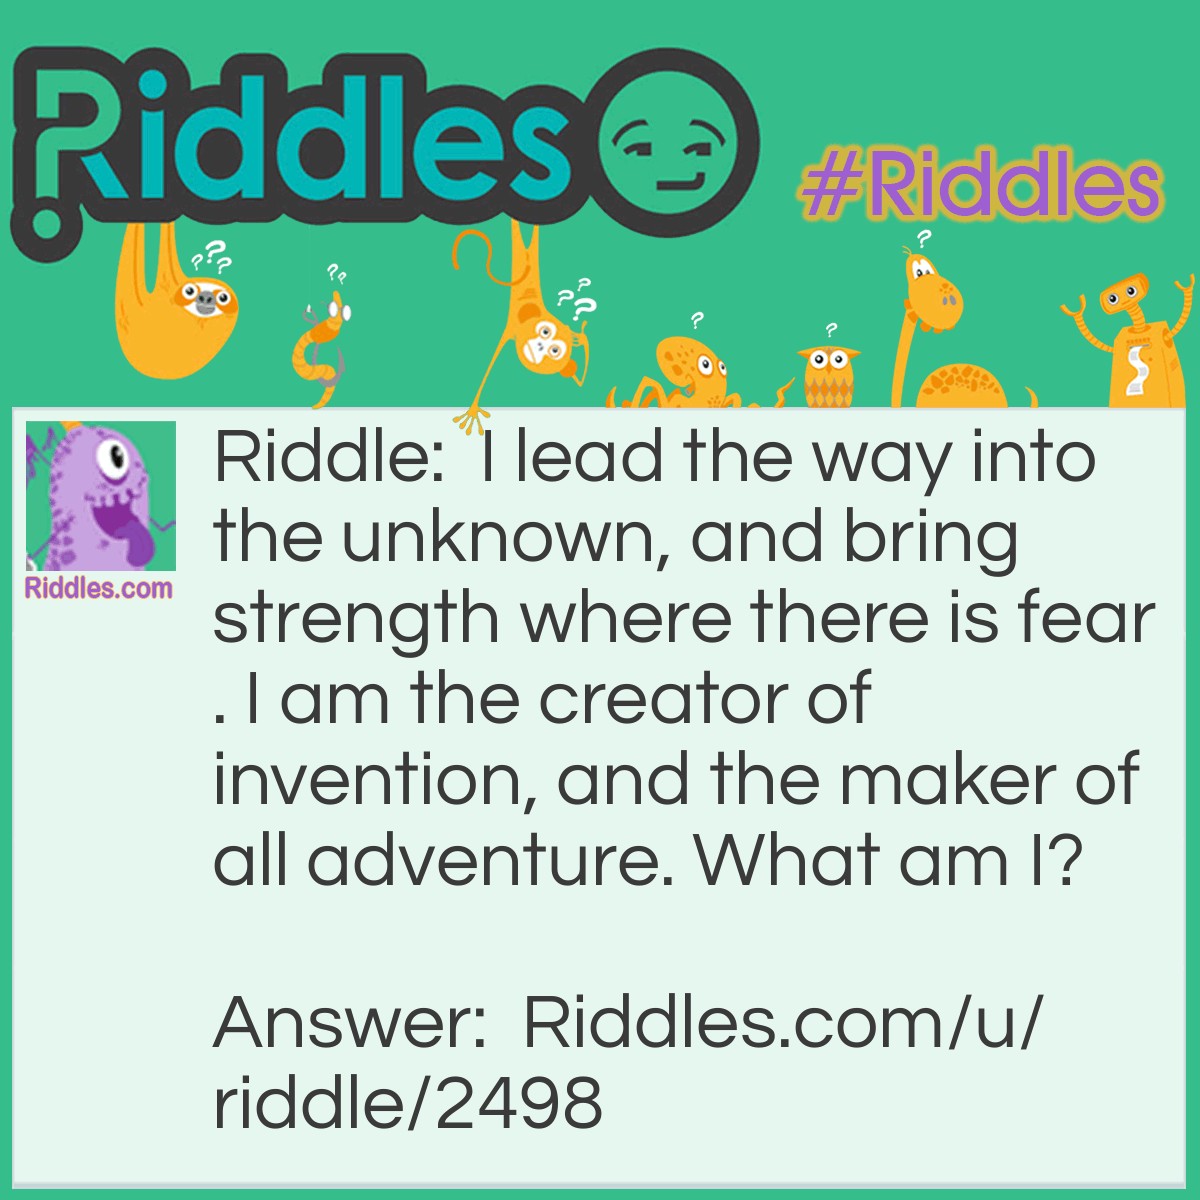 Riddle: I lead the way into the unknown, and bring strength where there is fear. I am the creator of invention, and the maker of all adventure. What am I? Answer: I am curiosity!